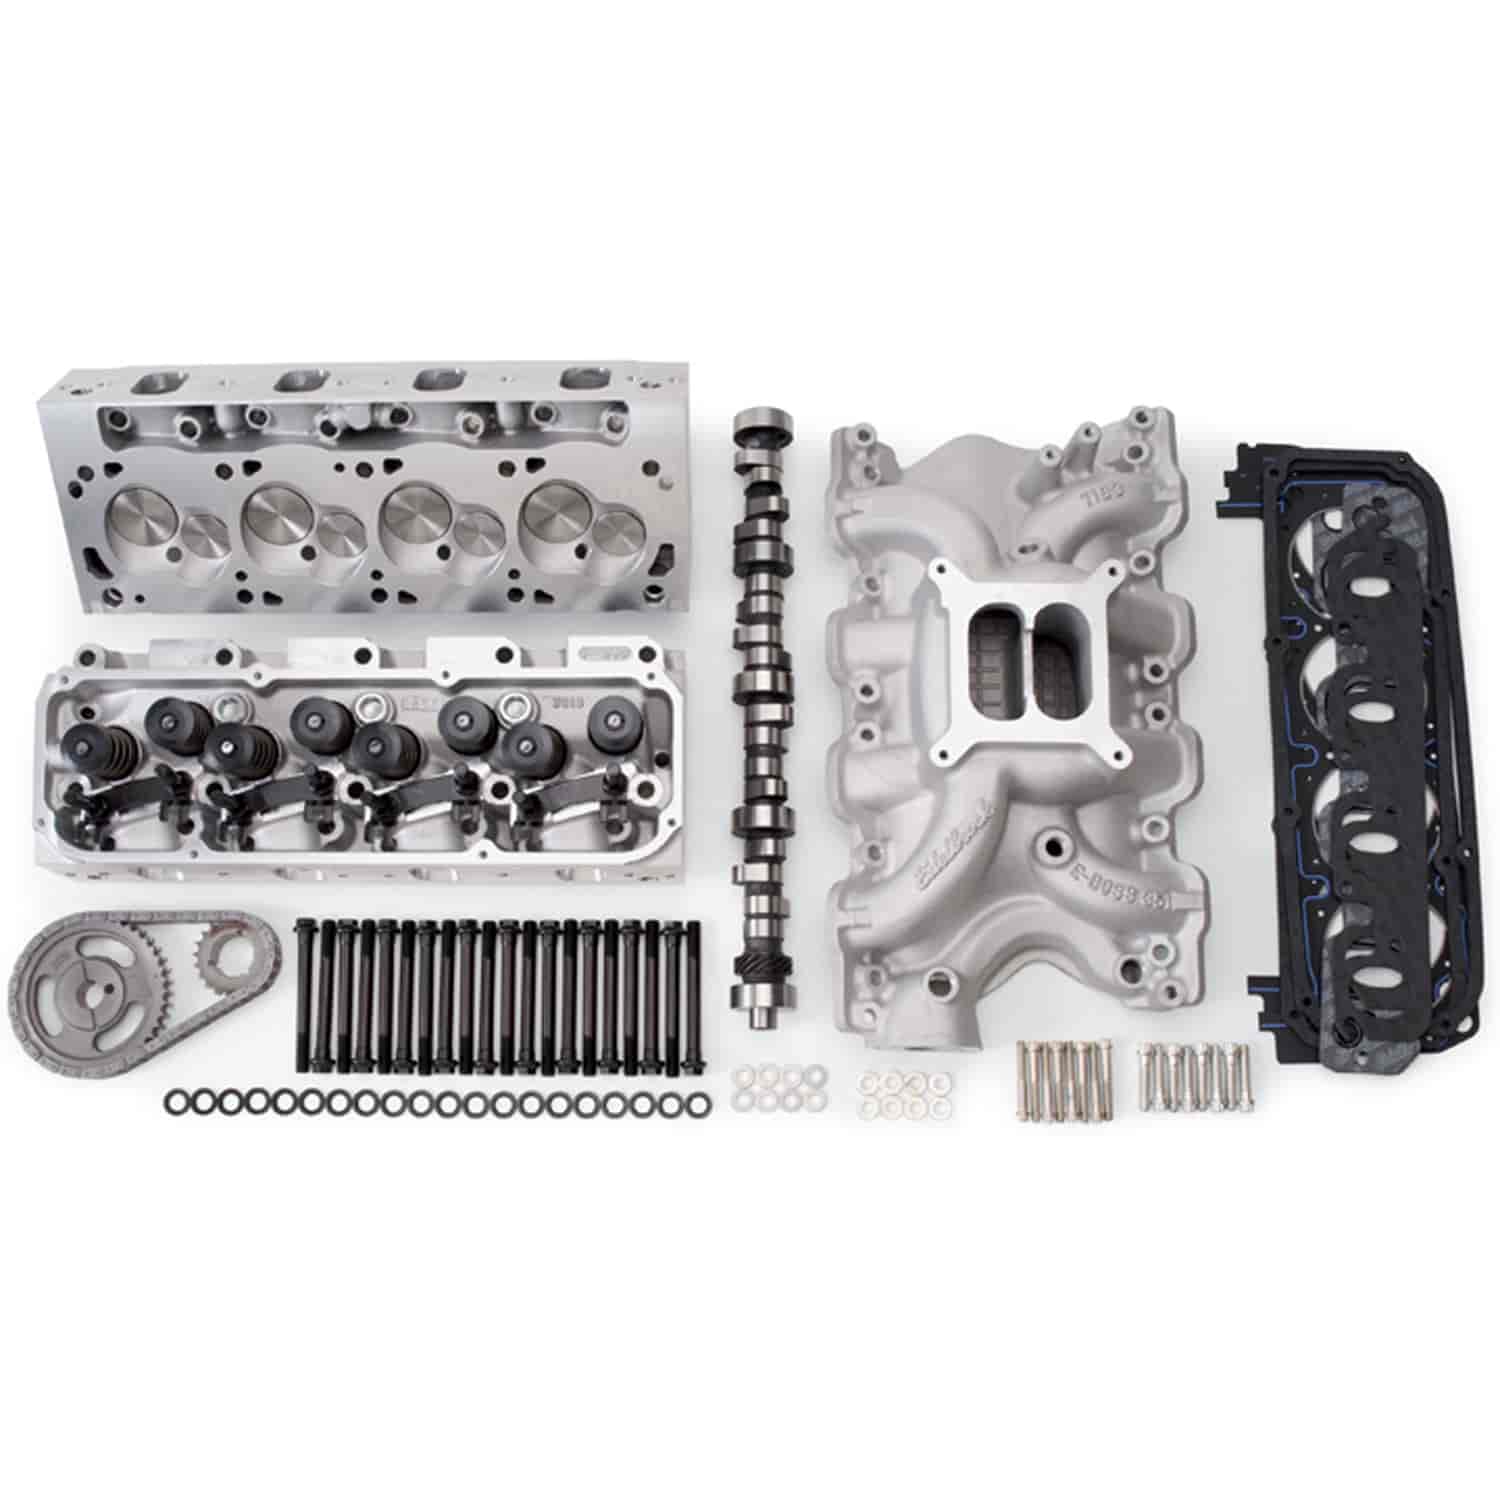 RPM Power Package Top End Kit for Clevor Small Block Ford 351W Block With Cleveland Heads